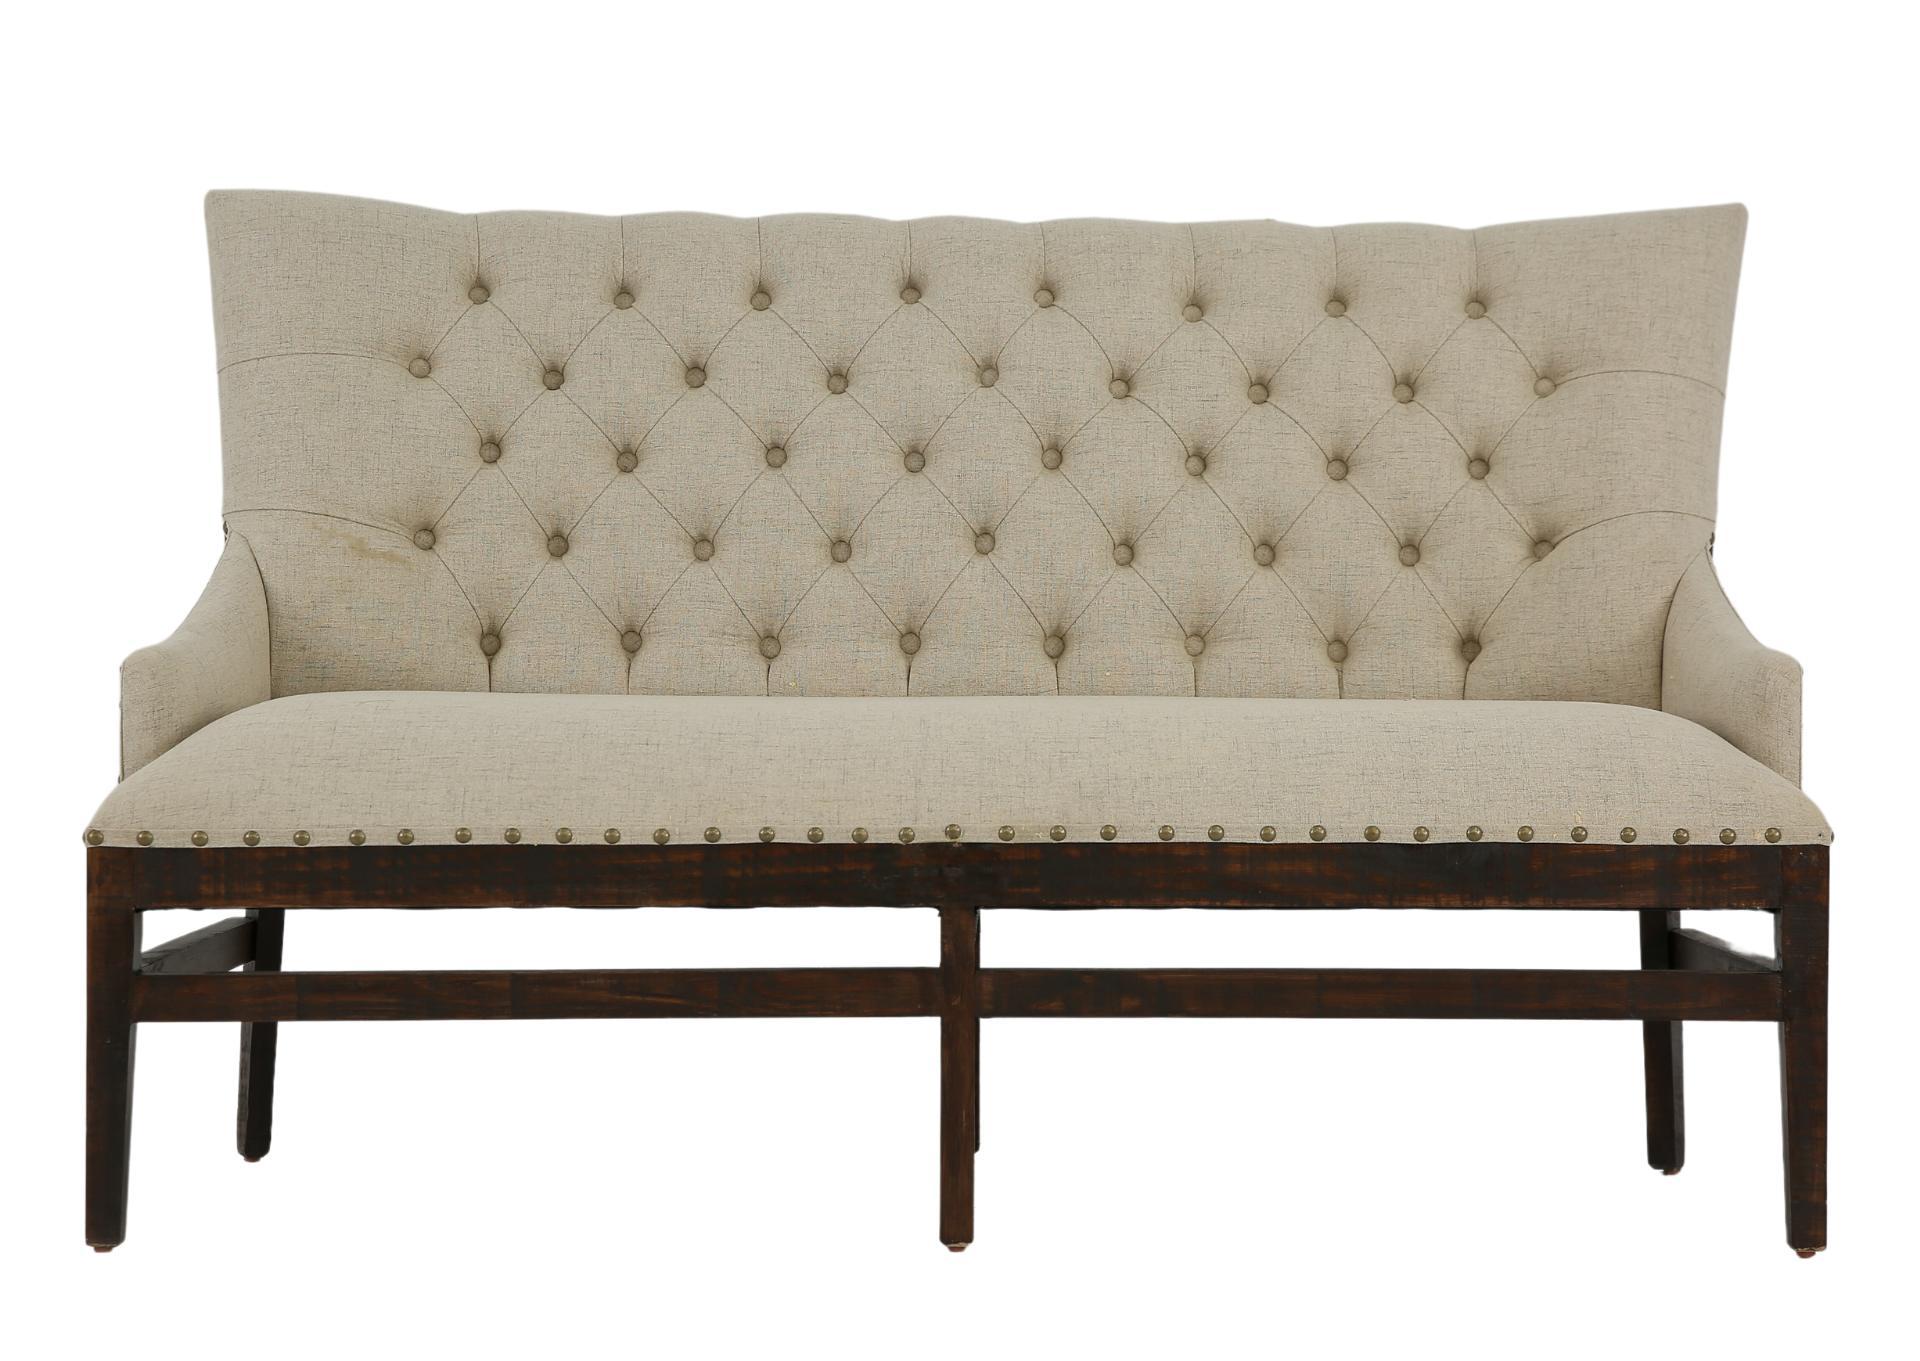 ADDISON SETTEE,ARDENT HOME